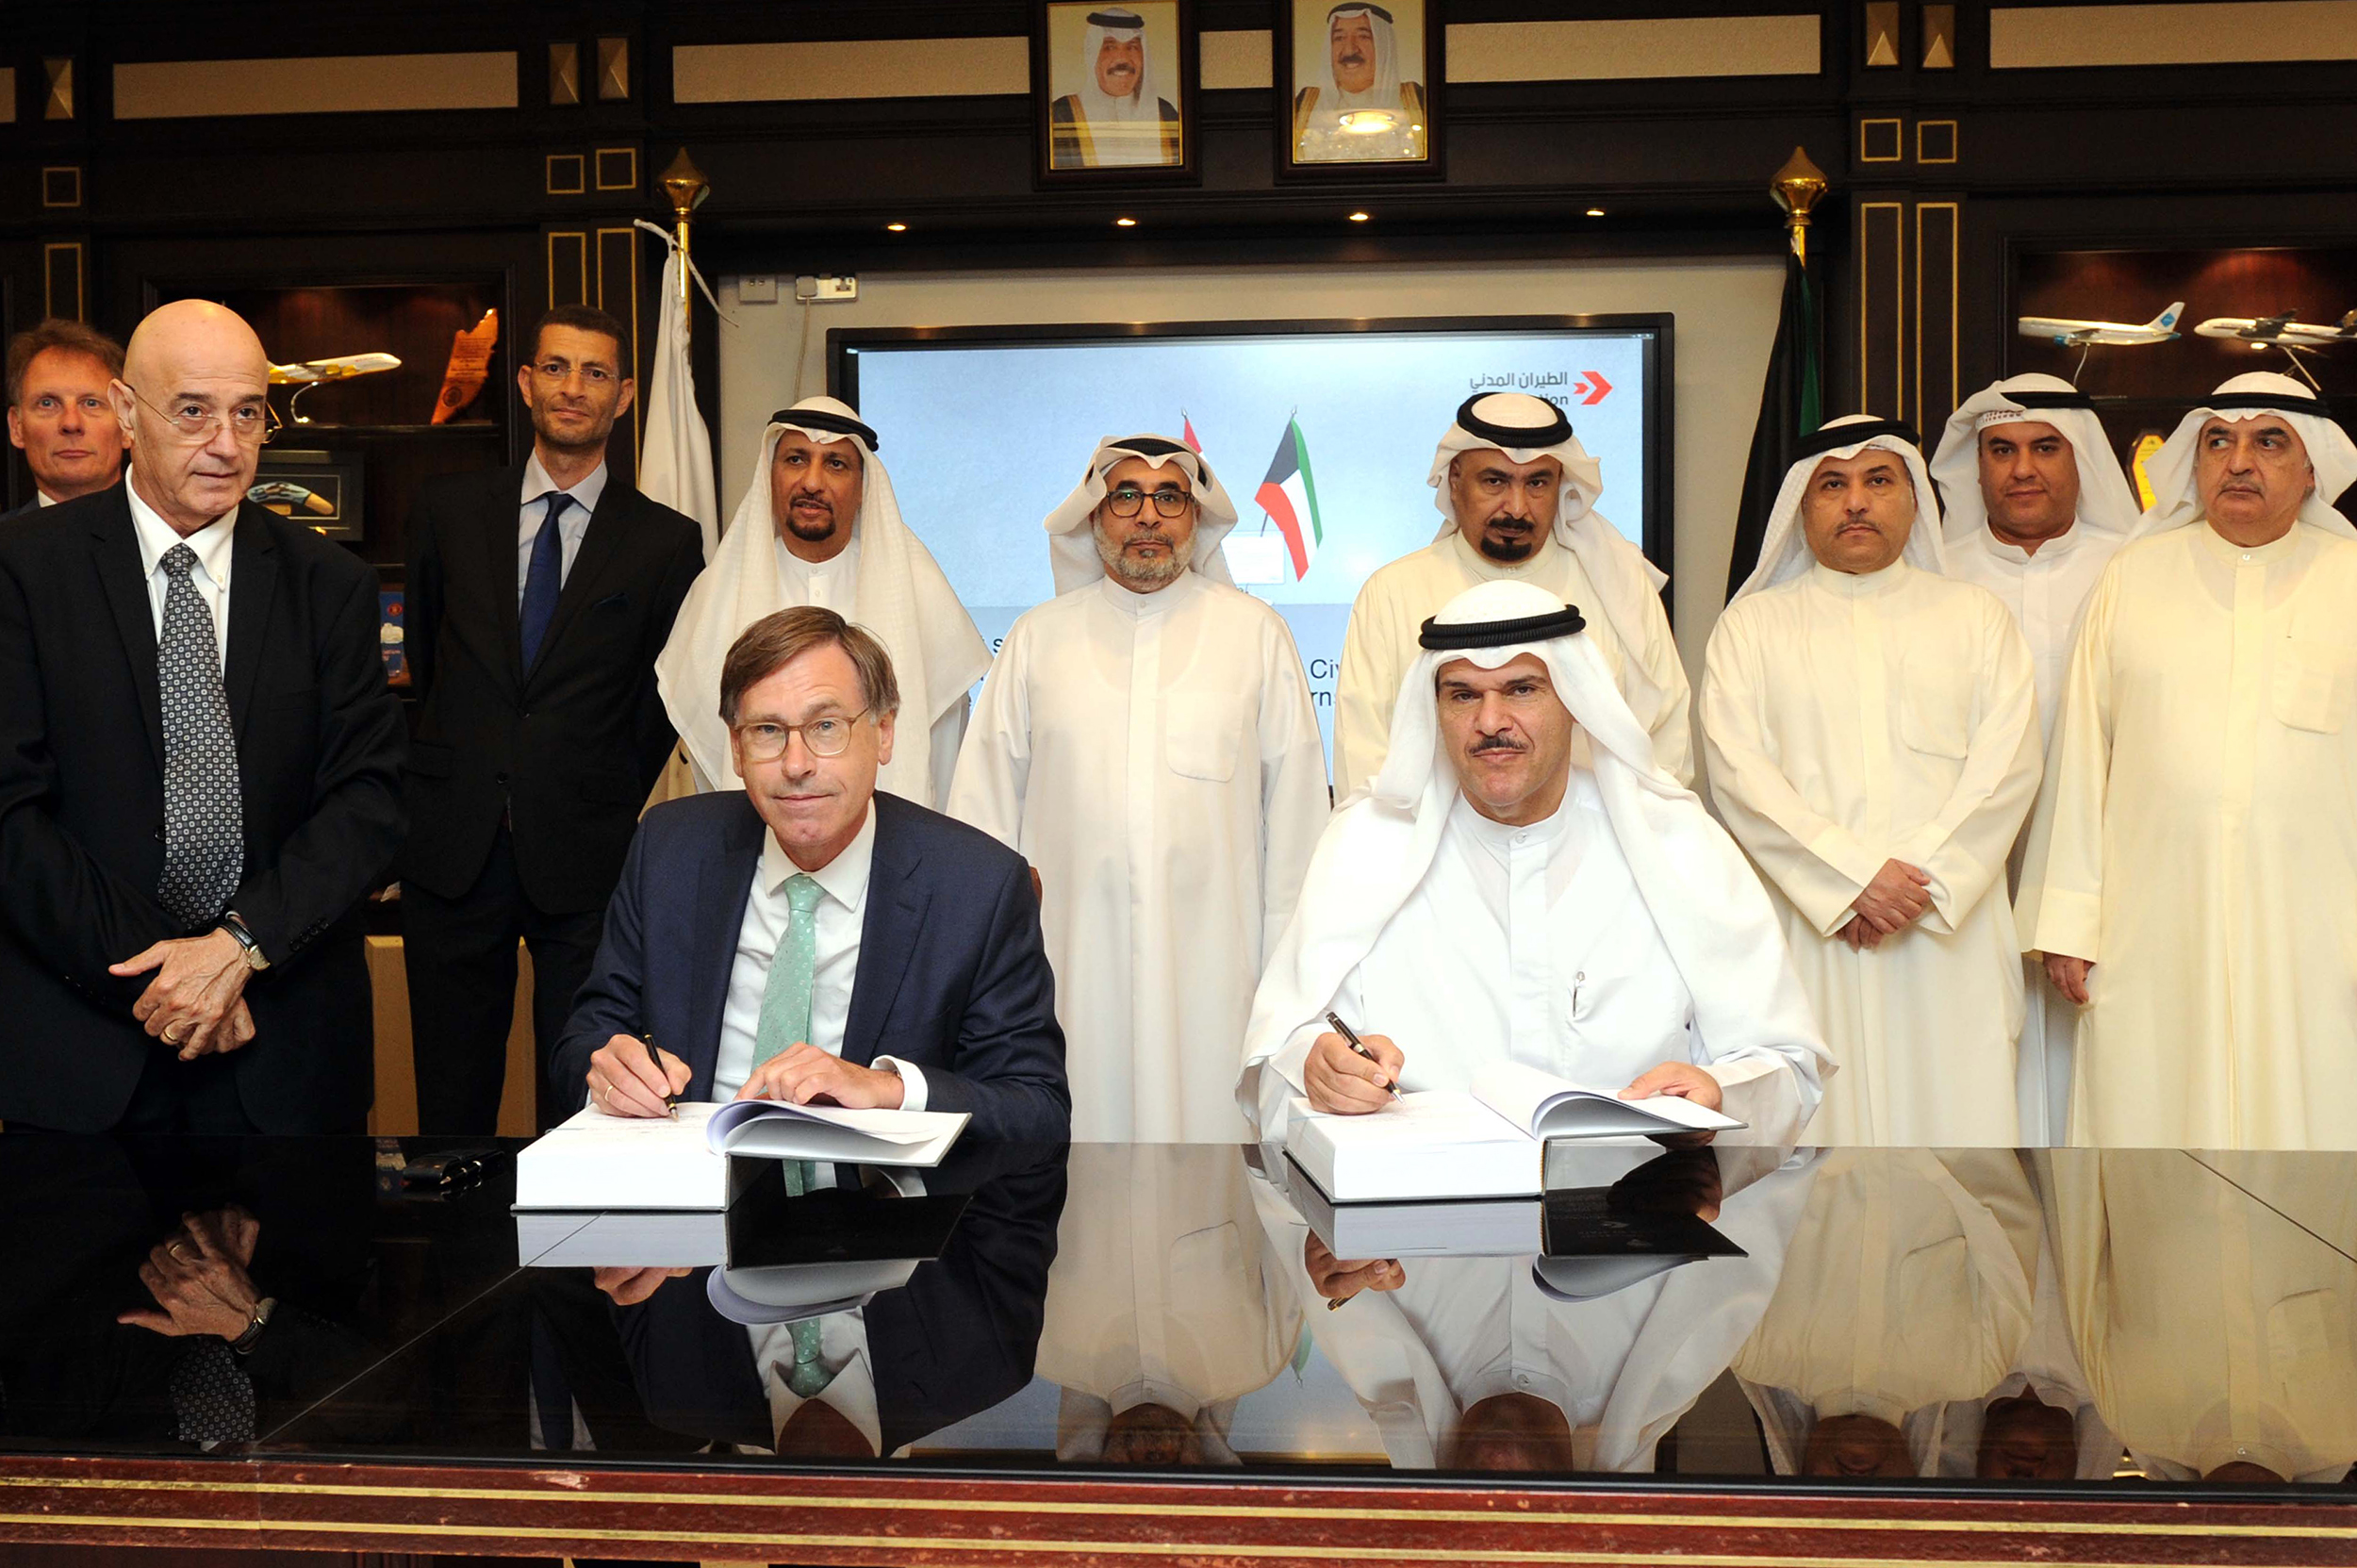 DGCA Chairman Sheikh Salman Sabah Salem Al-Humoud Al-Sabah signed a contract with Deerns CEO Jan Karel Mak to provide management and supervision services aimed at implementing a range of technical facilities at Kuwait International Airport